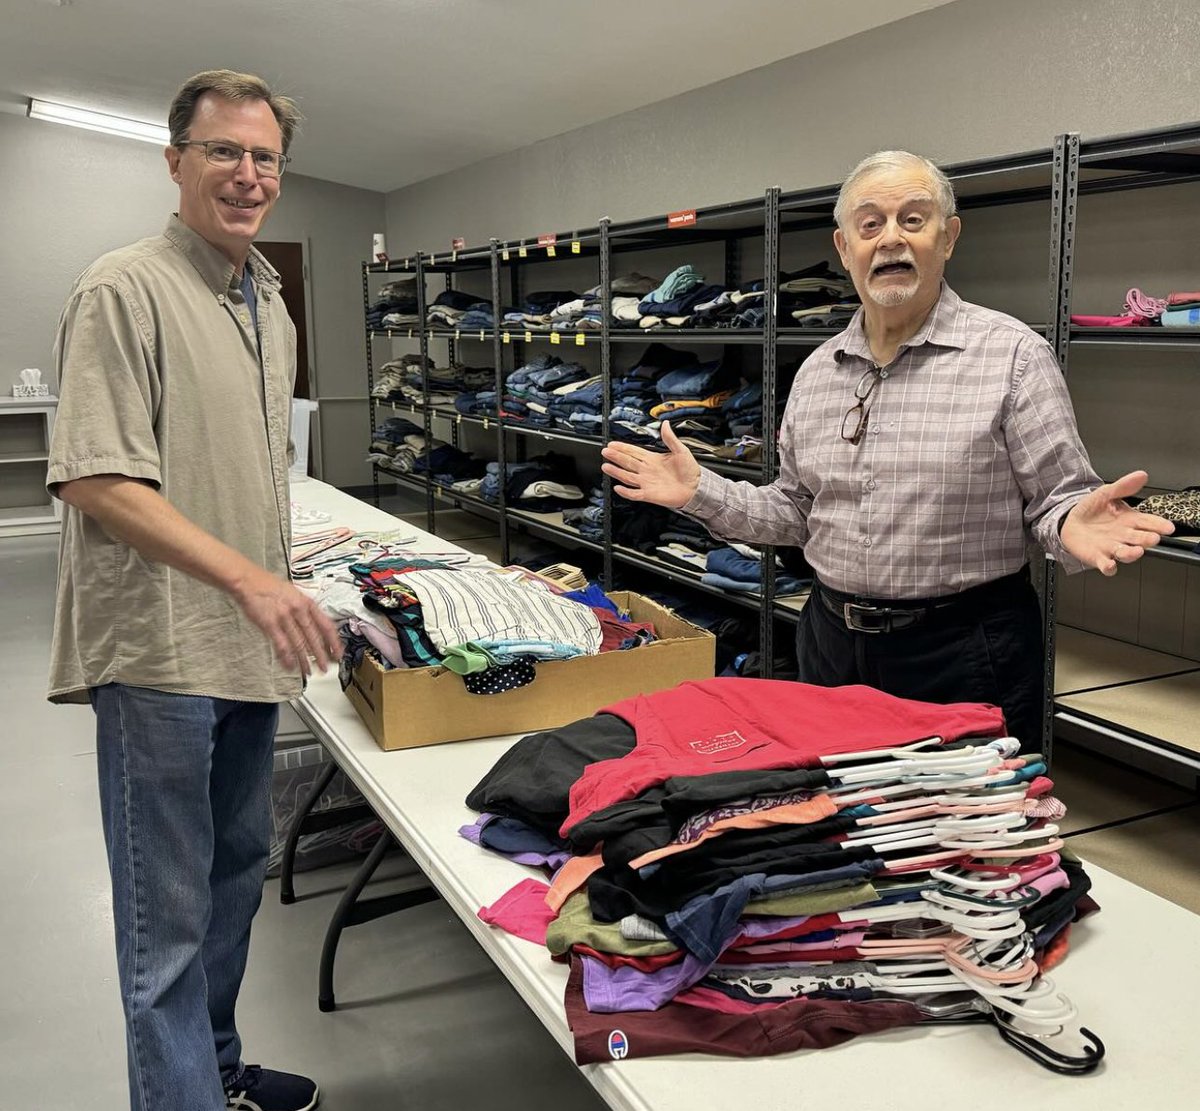 We are so thankful for these volunteers who recently served at our ministry center in Oklahoma City! They spent hours unpacking boxes of summer clothes and getting the ministry center’s clothing closet ready to meet needs in these upcoming warmer months.